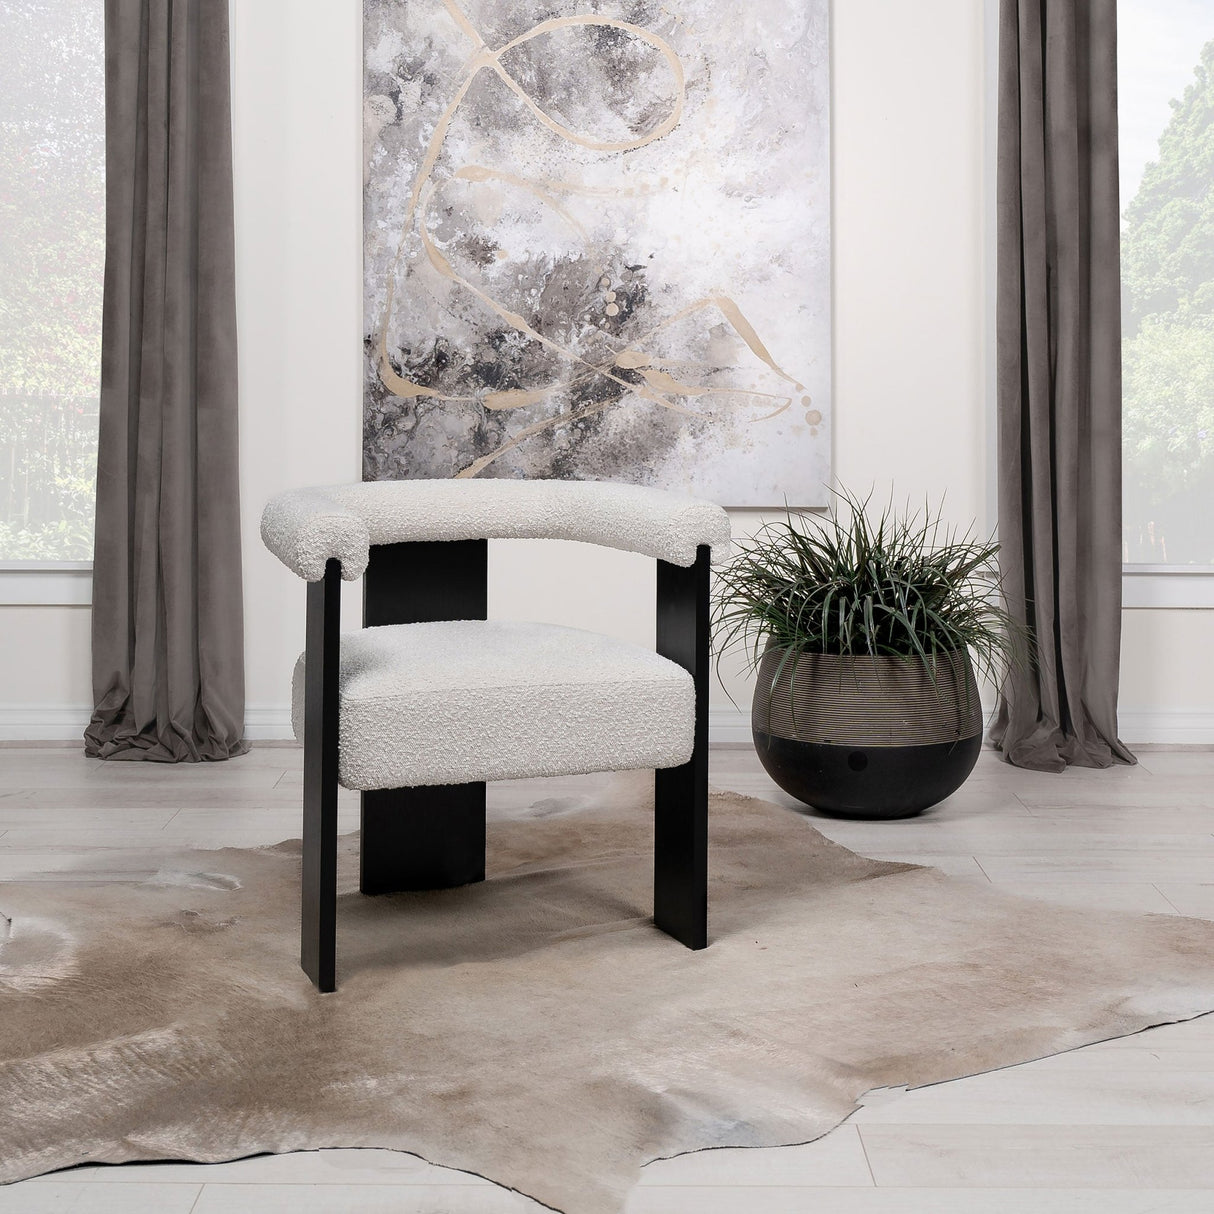 Accent Chair - Ramona Boucle Upholstered Accent Side Chair Cream and Black